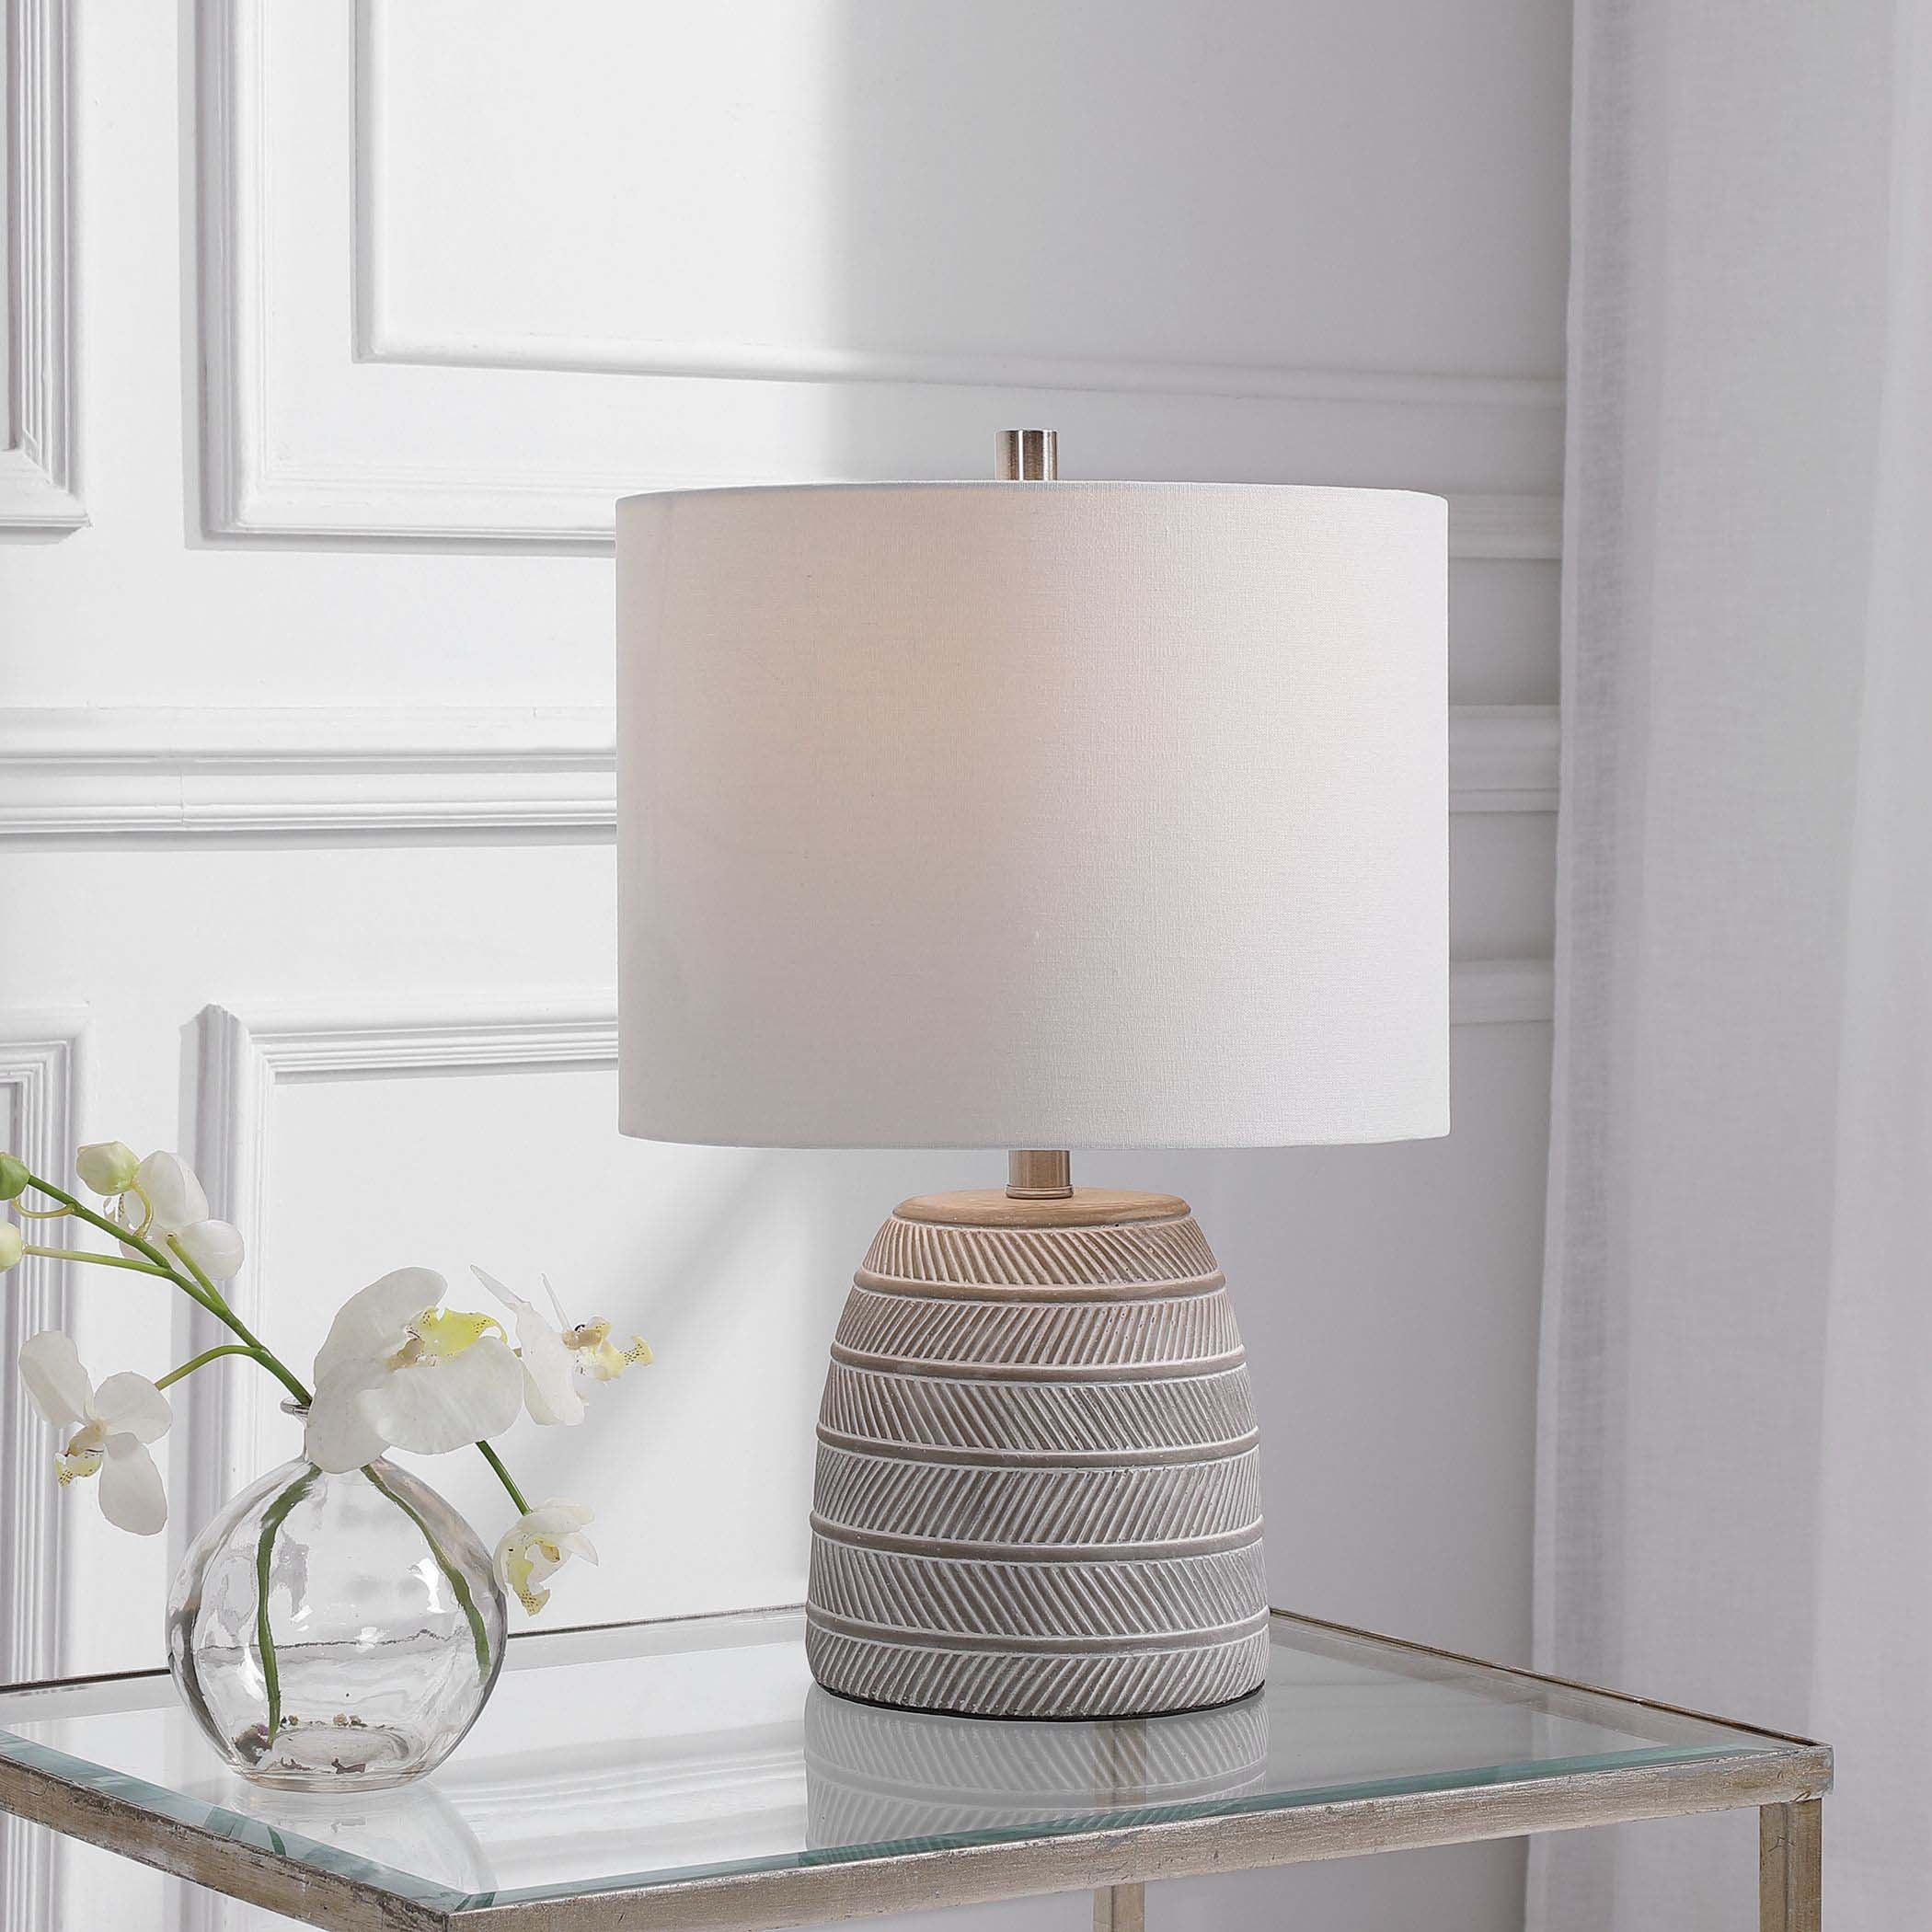 Decor Market Concrete Base Table Lamp - Accented With Brushed Nickel Plated Details